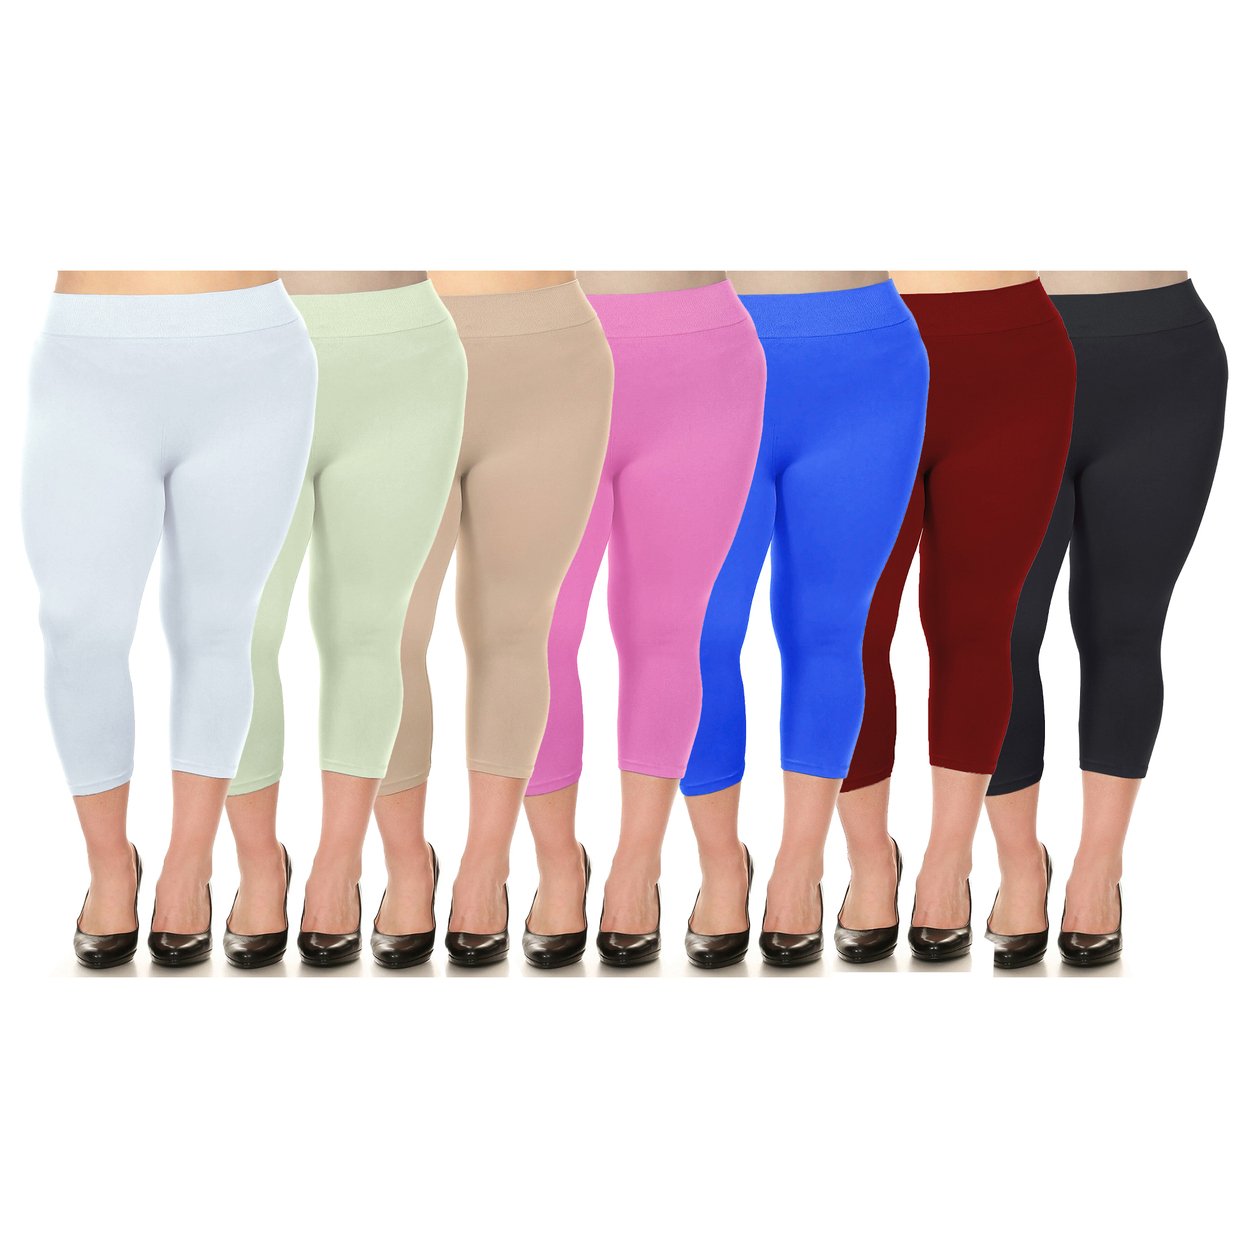 Women's Ultra-Soft High Waisted Smooth Stretch Active Yoga Capri Leggings Plus Size Available - Beige, 3x